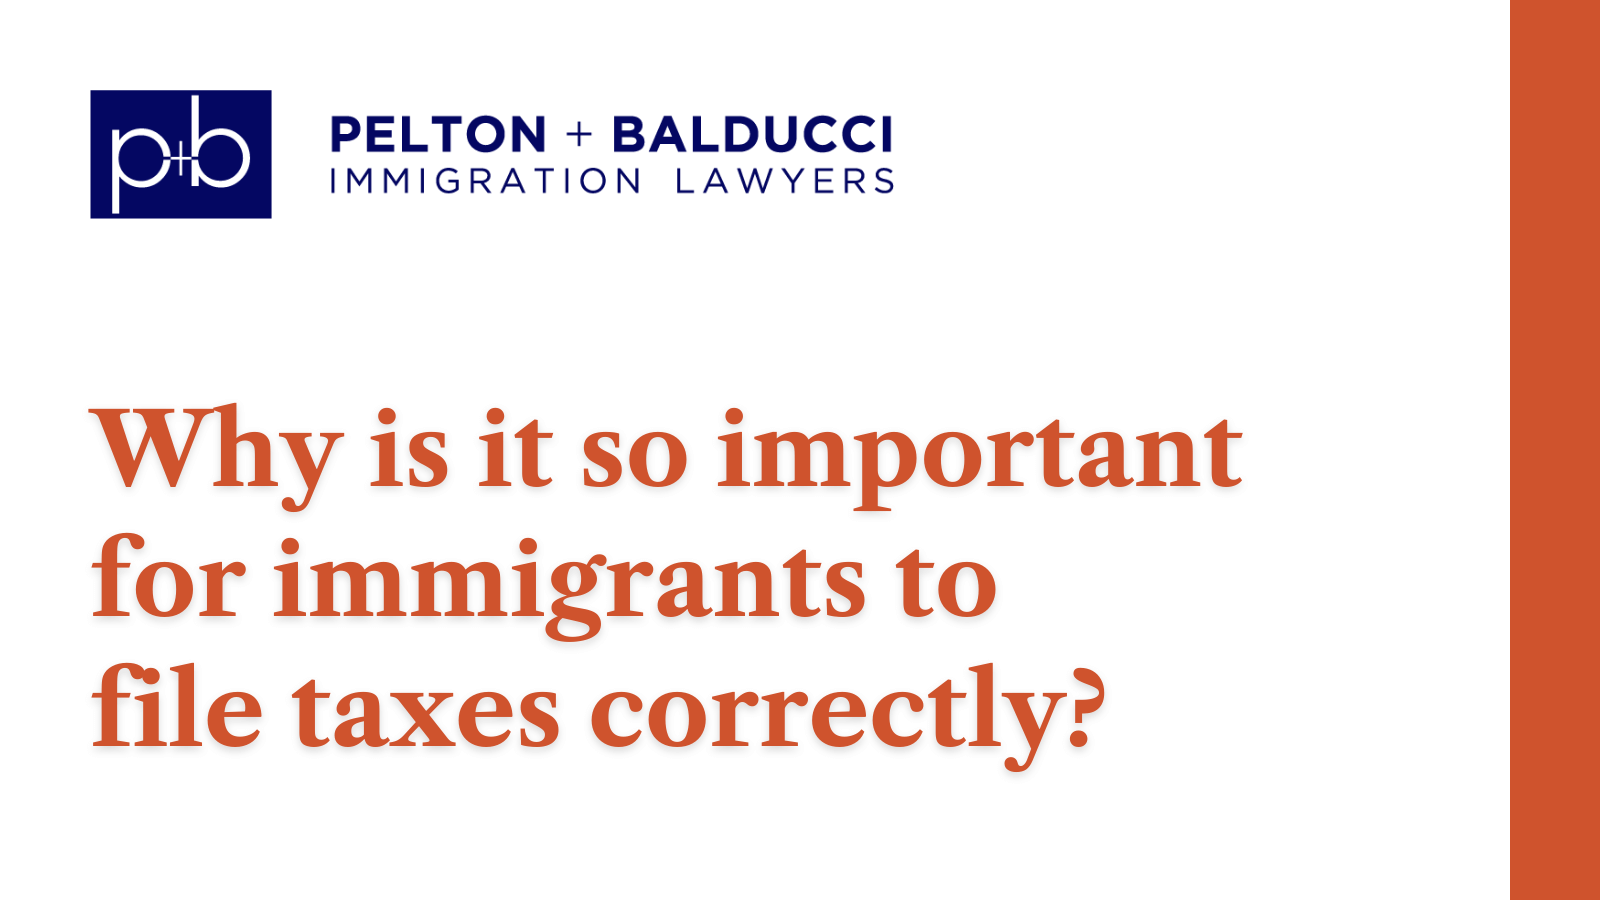 Why is it so important for immigrants to file taxes correctly - New Orleans Immigration Lawyers - Pelton Balducci